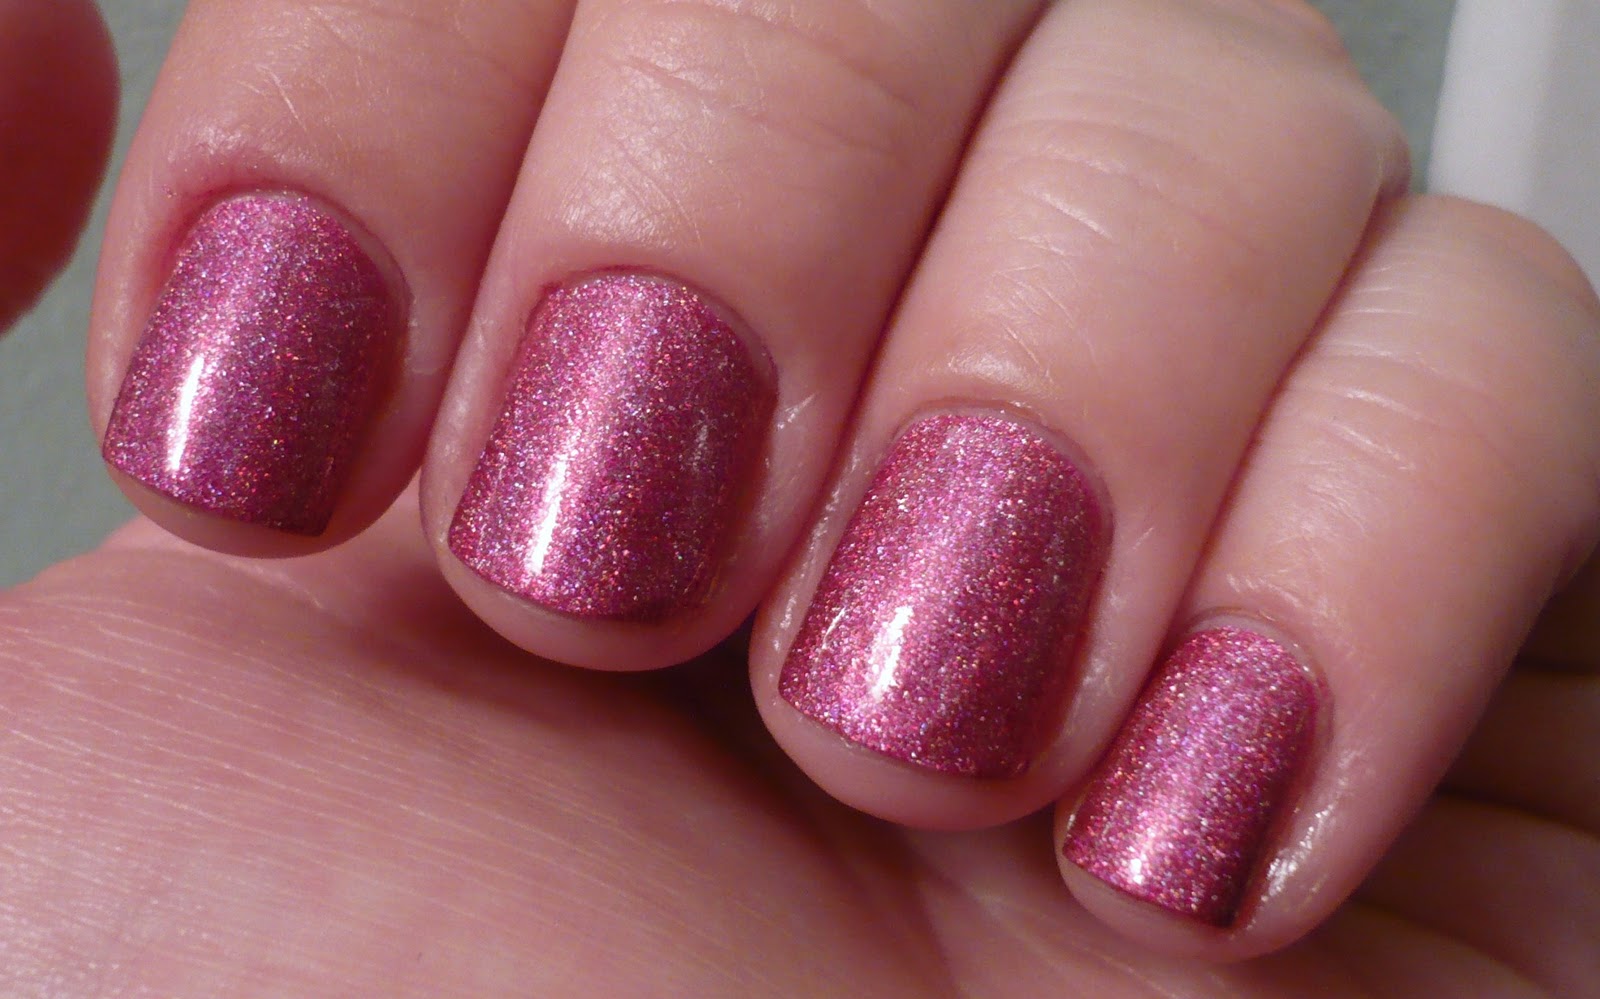 4. China Glaze Nail Lacquer in "Tickle My Triangle" - wide 6